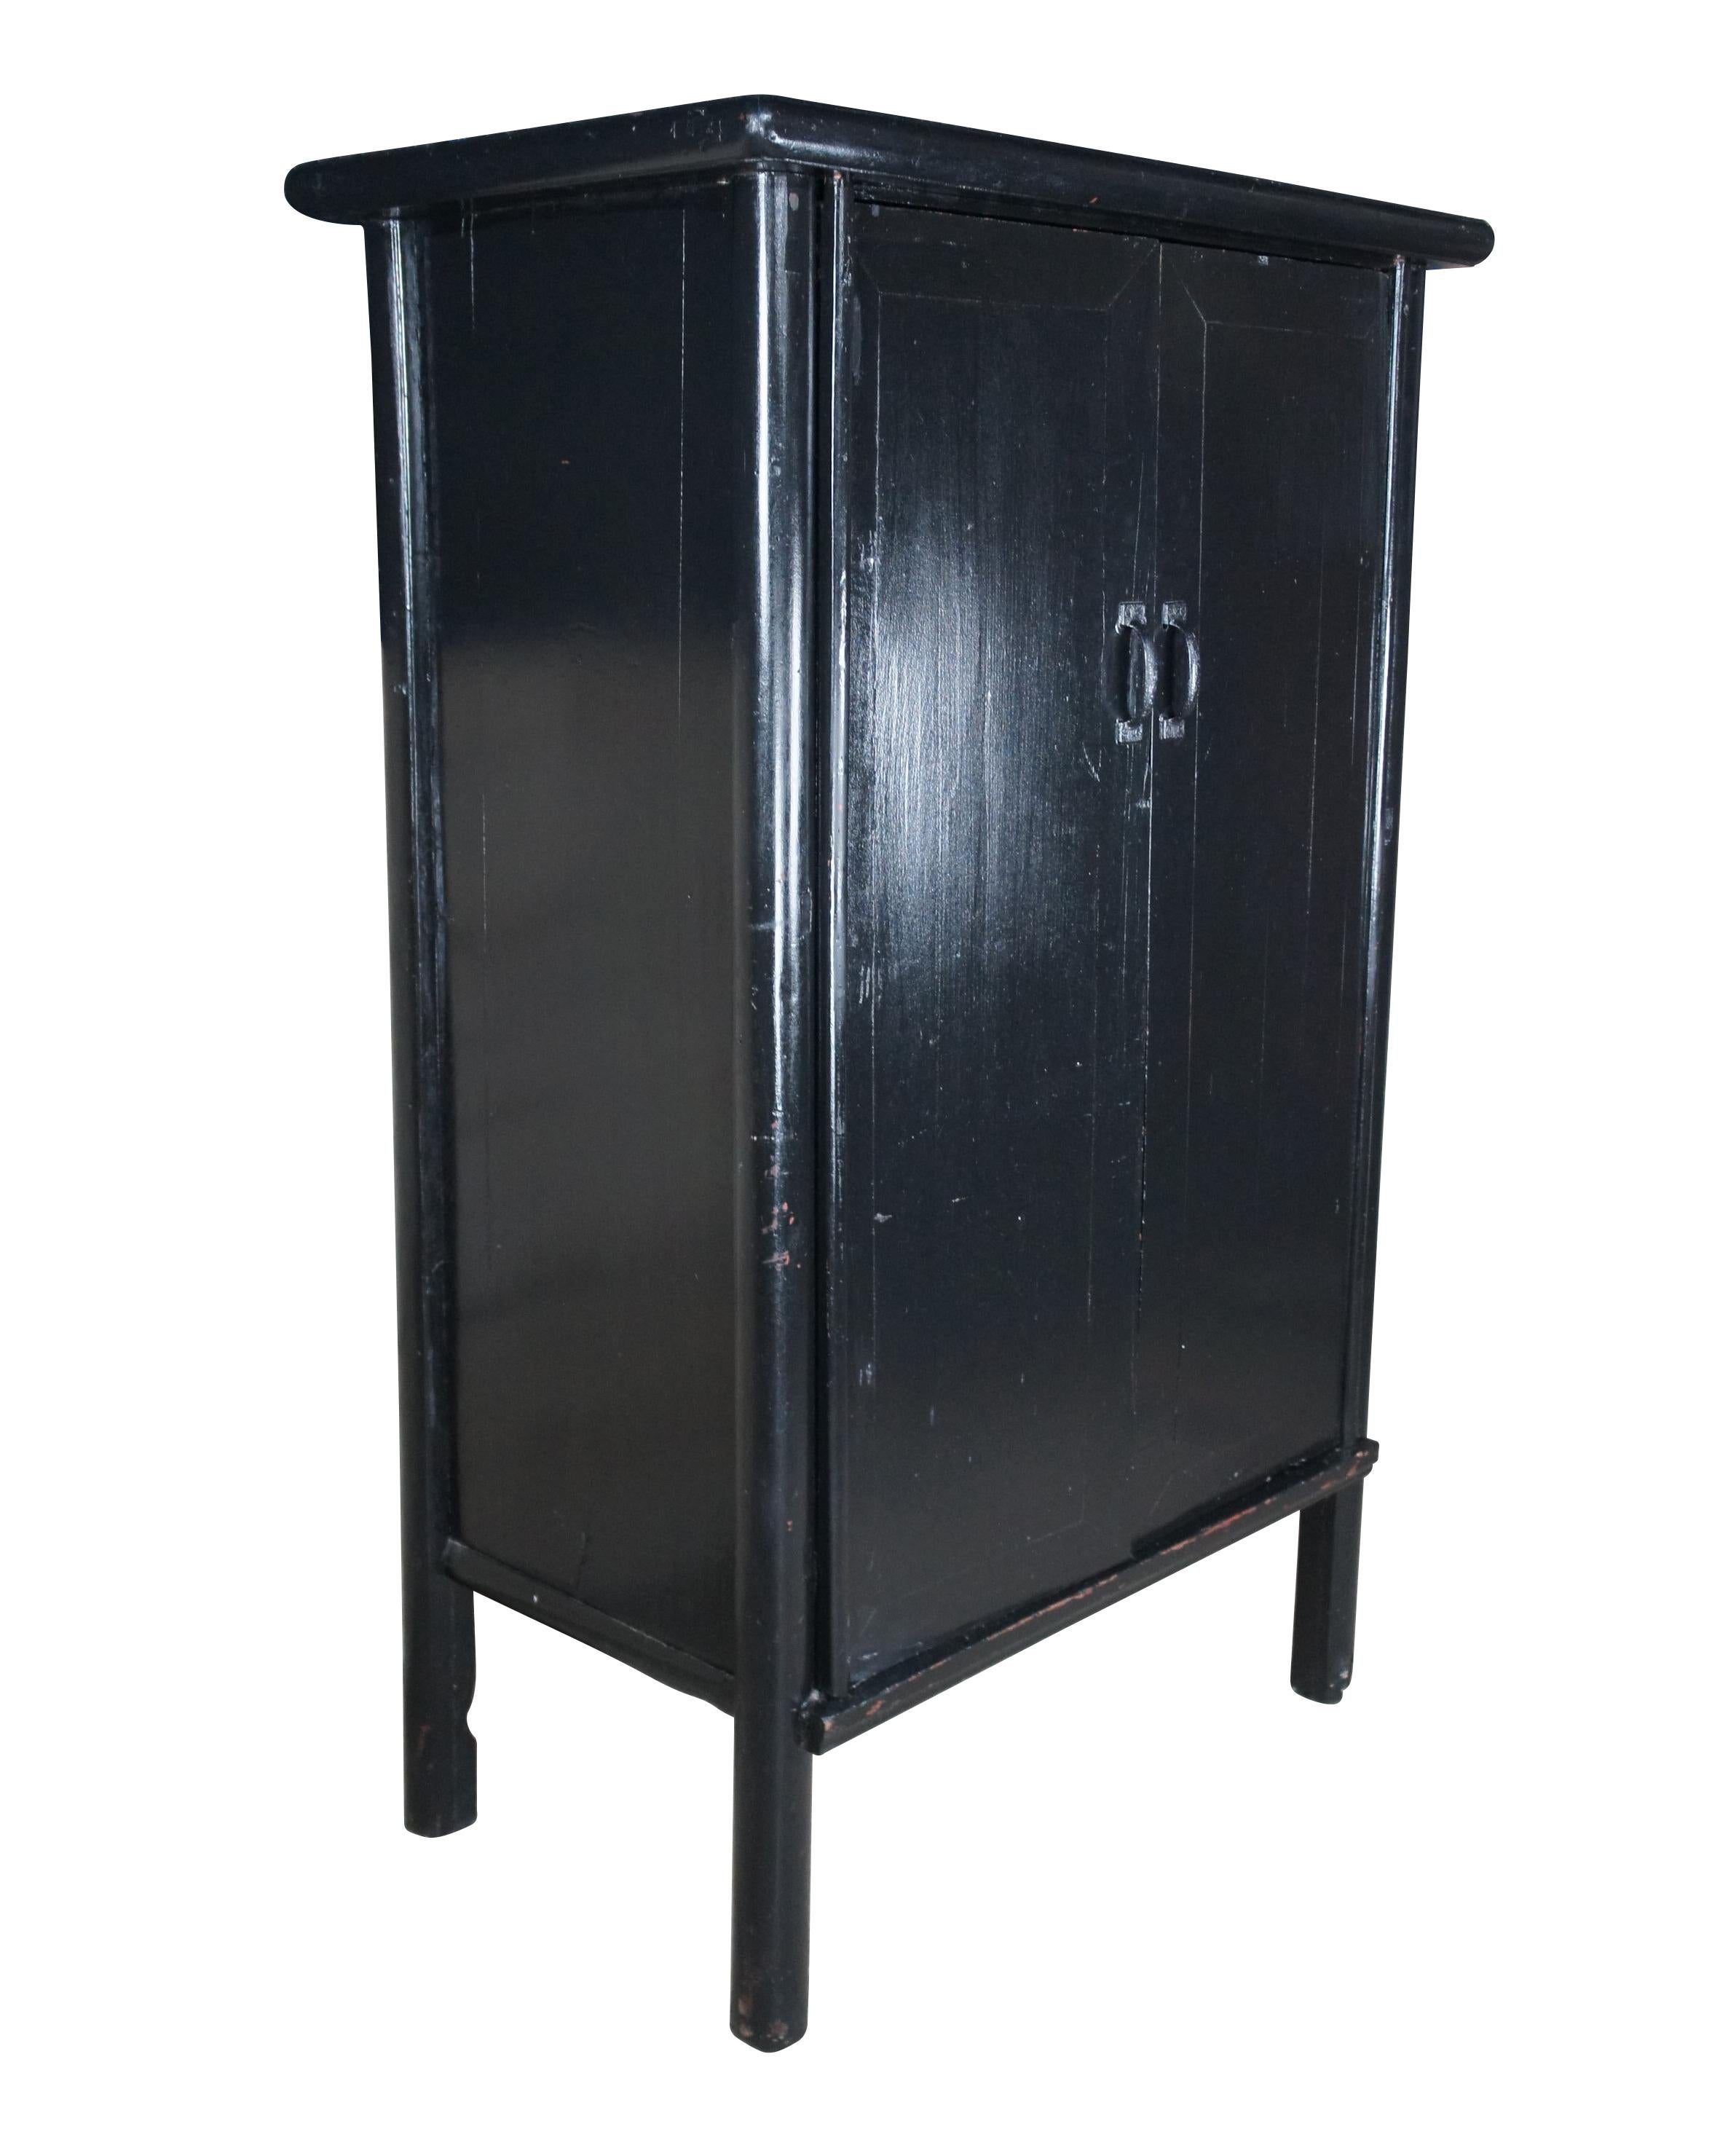 Chinese black lacquer Qing Dynasty lines press or scholars cabinet, circa 1890s.  Features two doors with iron hardware that open to a natural finished interior with two large storage areas and two hand dovetailed drawers.  The cabinet is raised